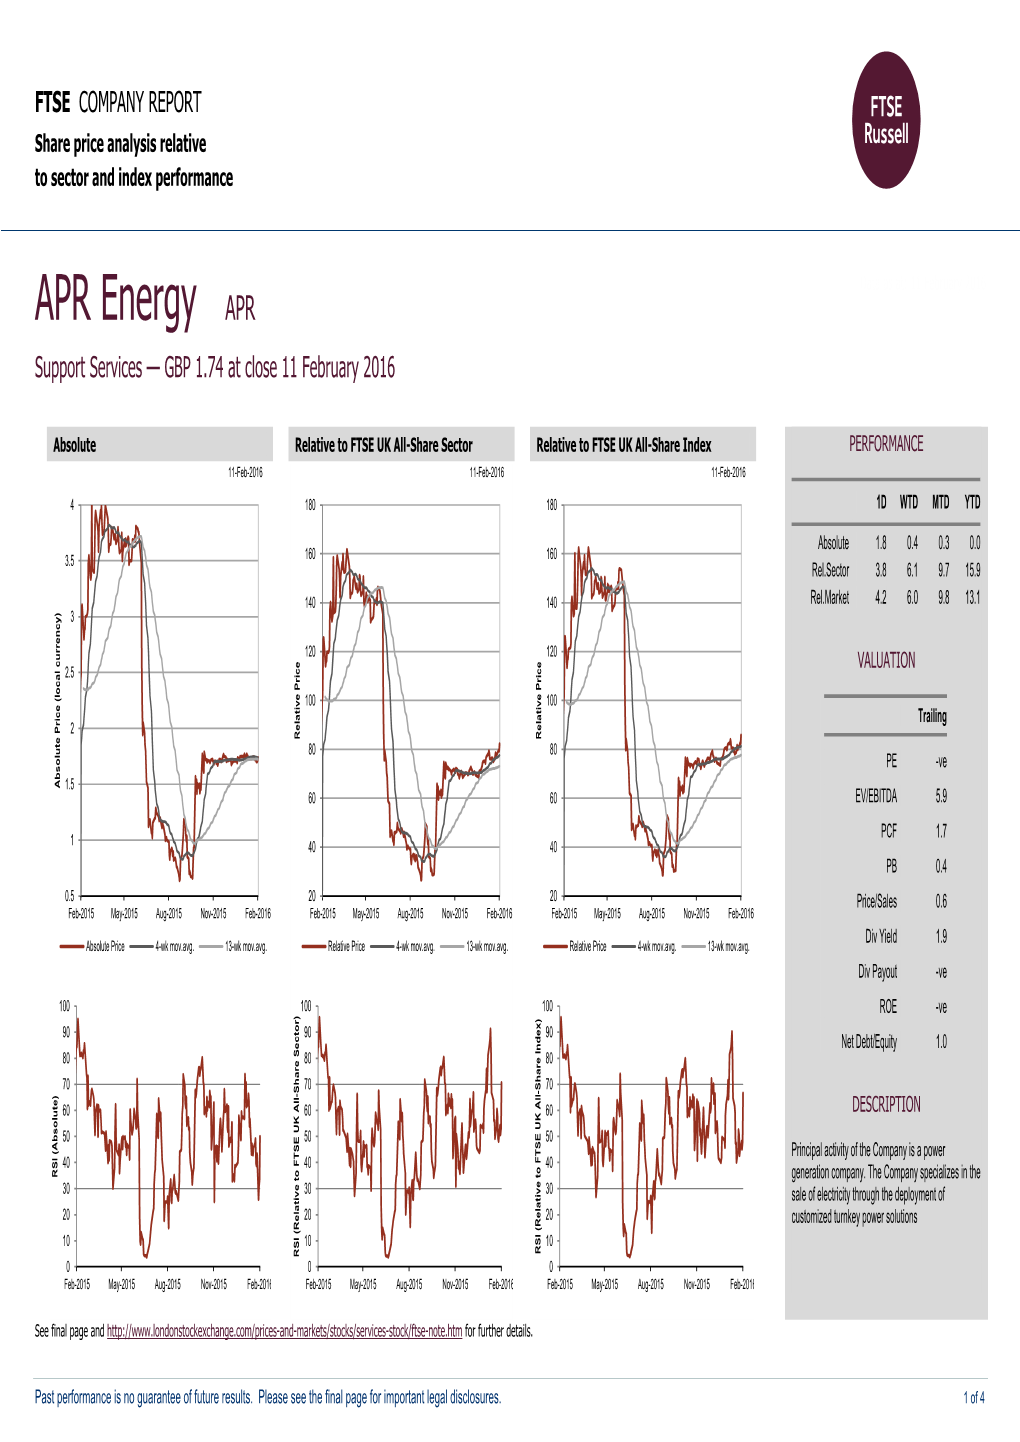 APR Energy APR Support Services — GBP 1.74 at Close 11 February 2016